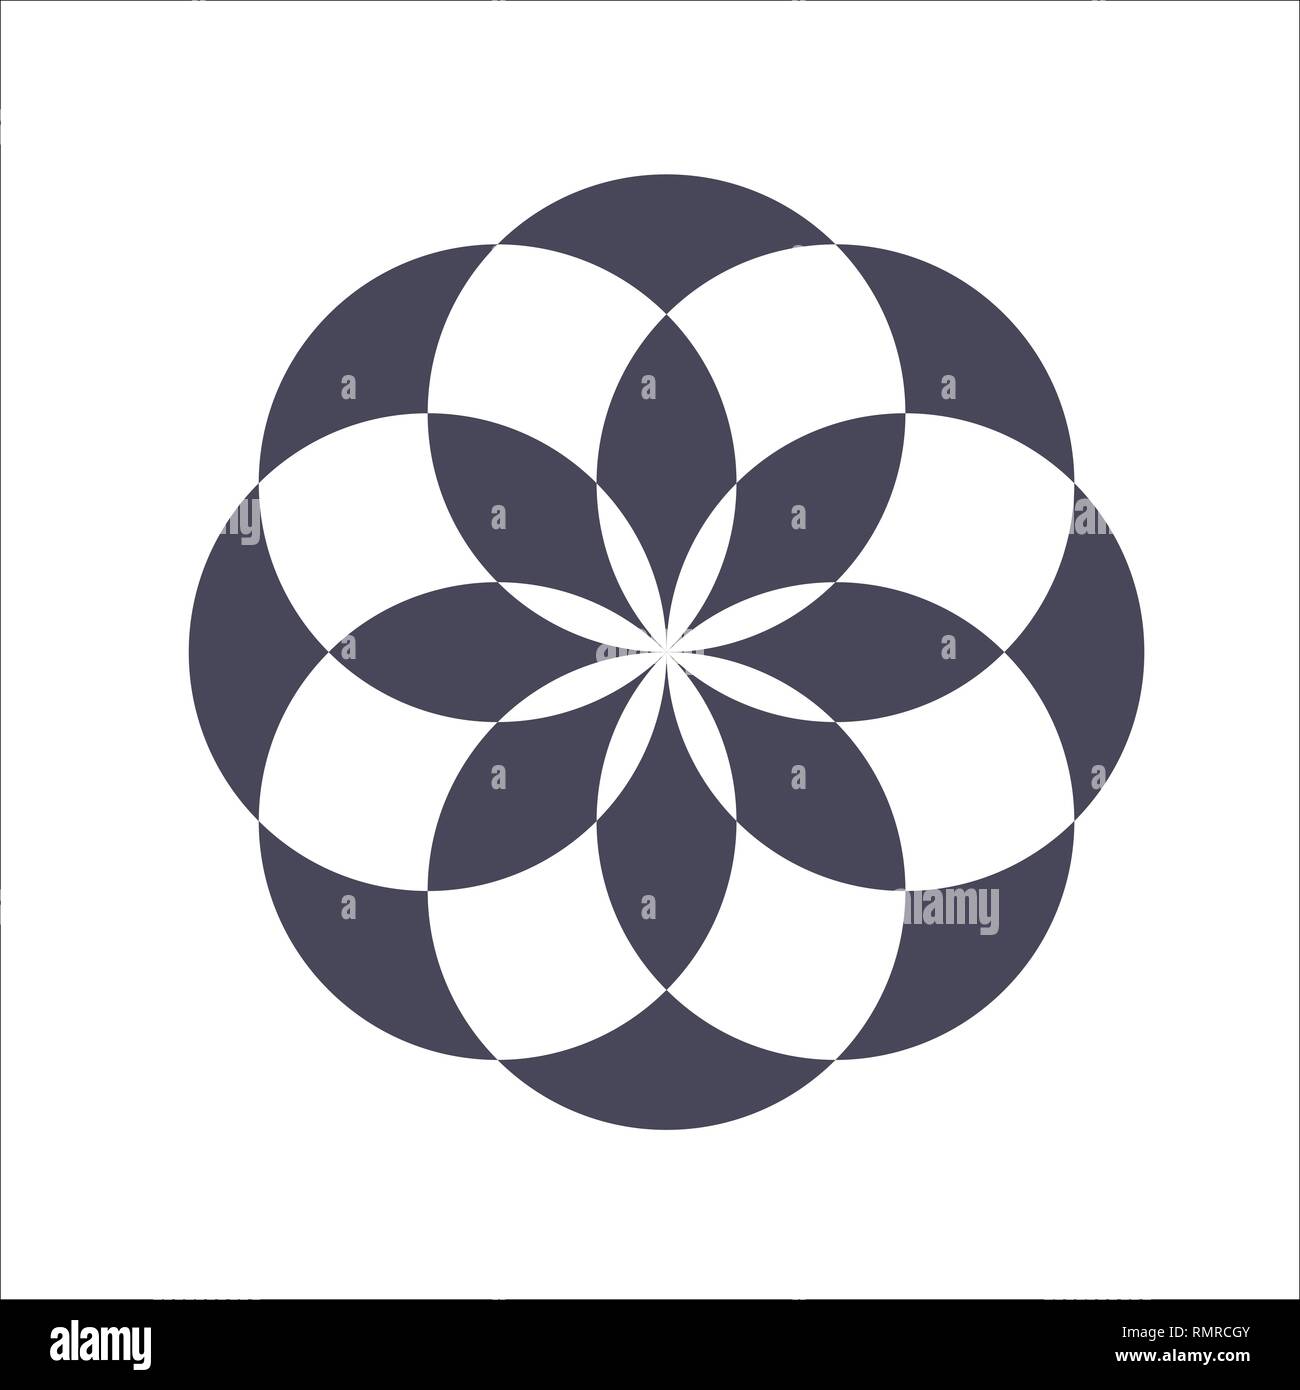 Monochrome elegant circular pattern in black and white. Circular mathematical ornament. A vector circular pattern from the crossed circles. Mandala. Stock Vector